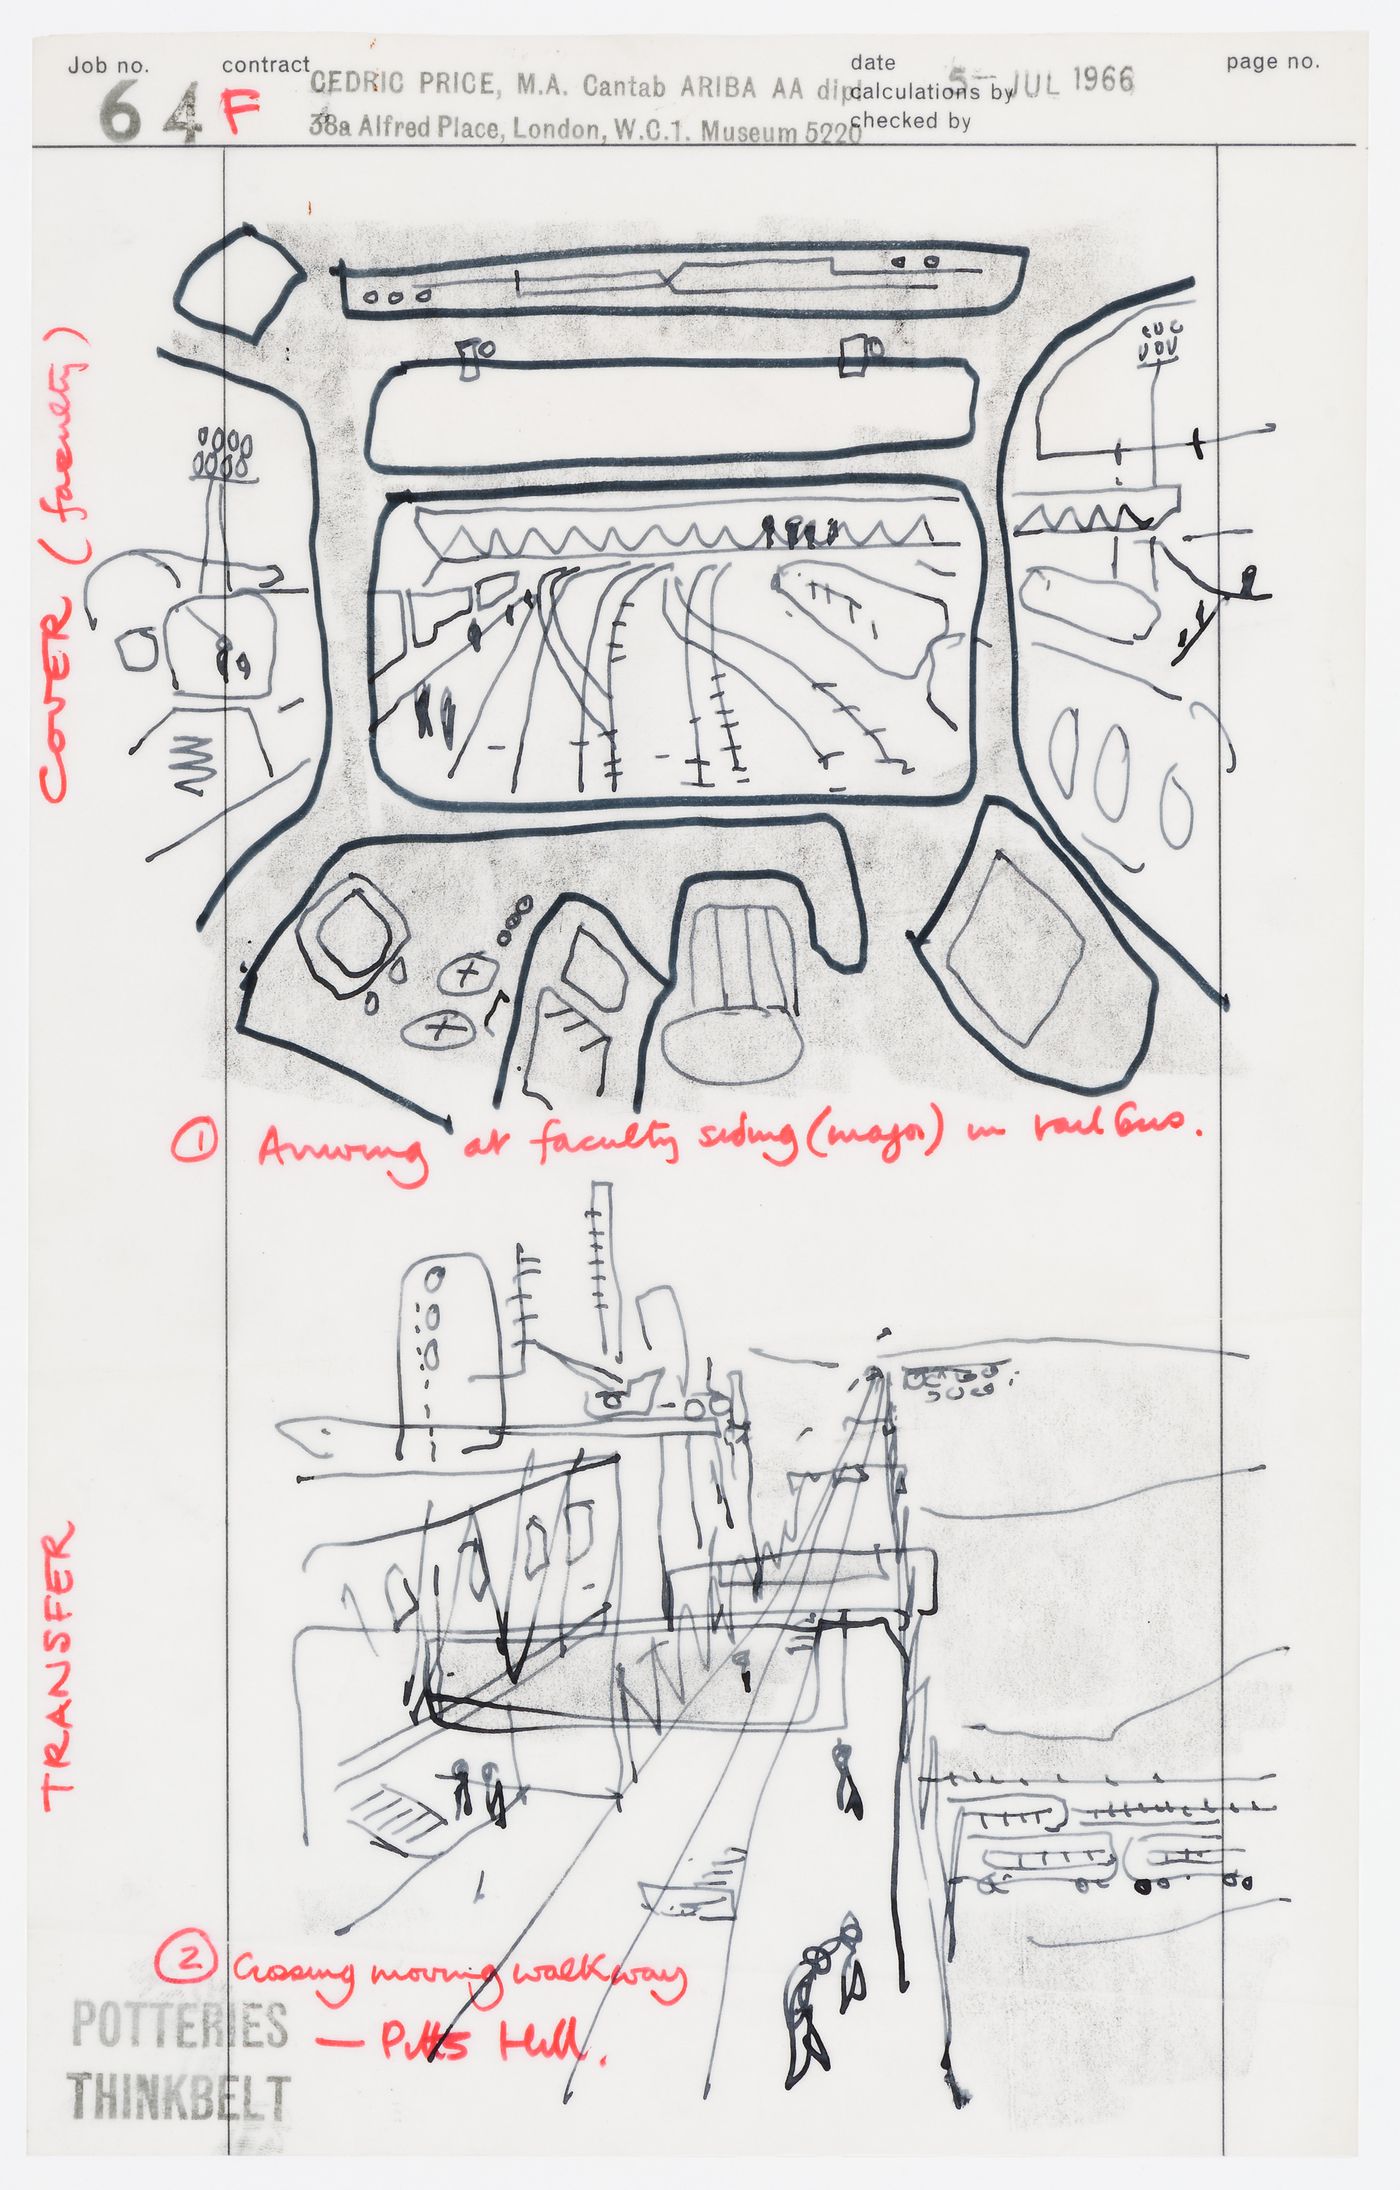 Potteries Thinkbelt: sketch of arrival by rail bus at a faculty siding and moving walkways at Pitts Hill transfer area